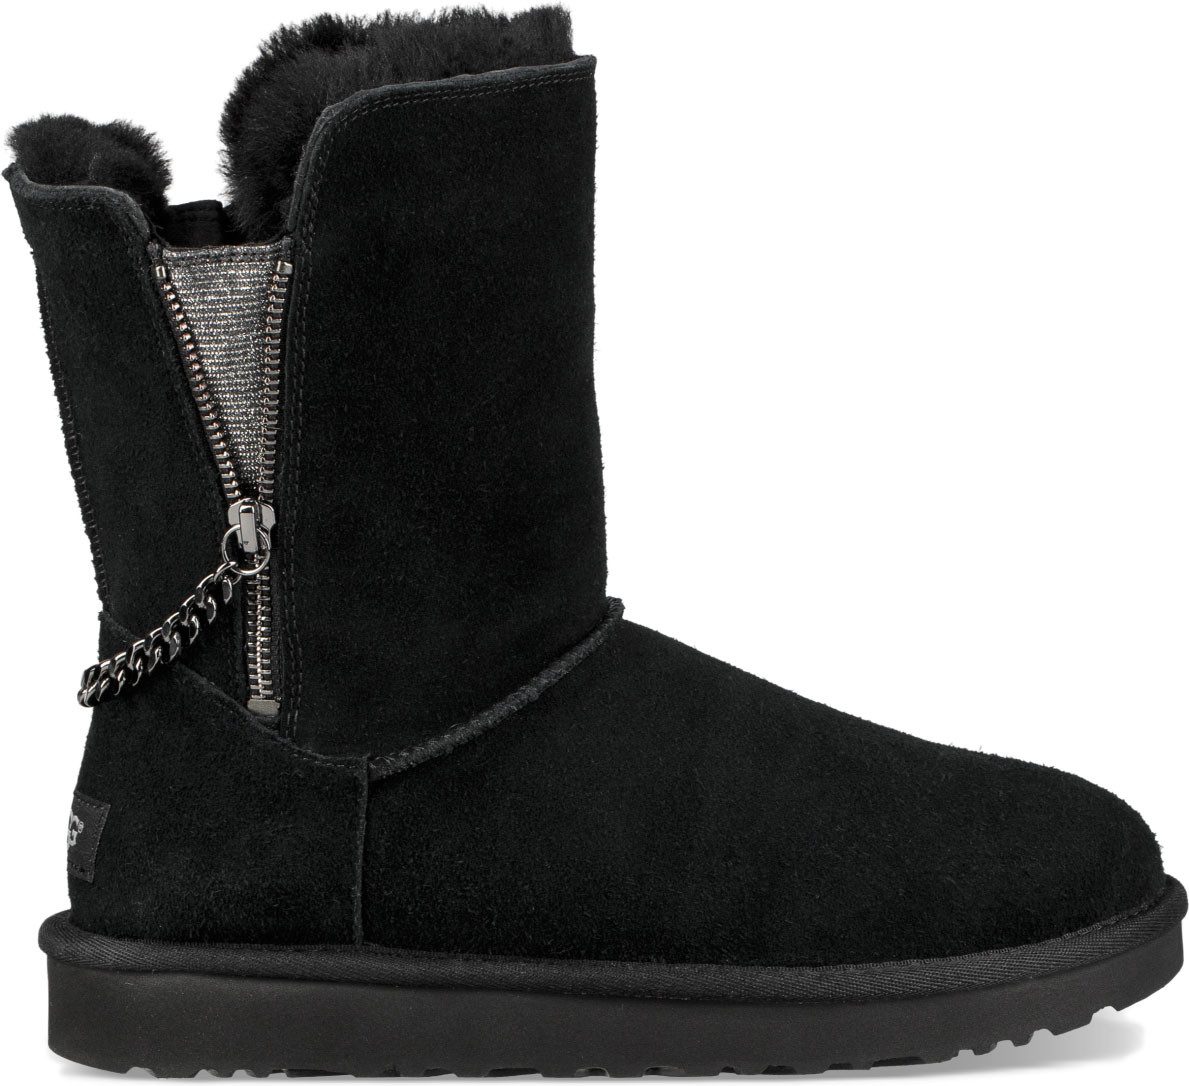 ugg women's classic sparkles boots